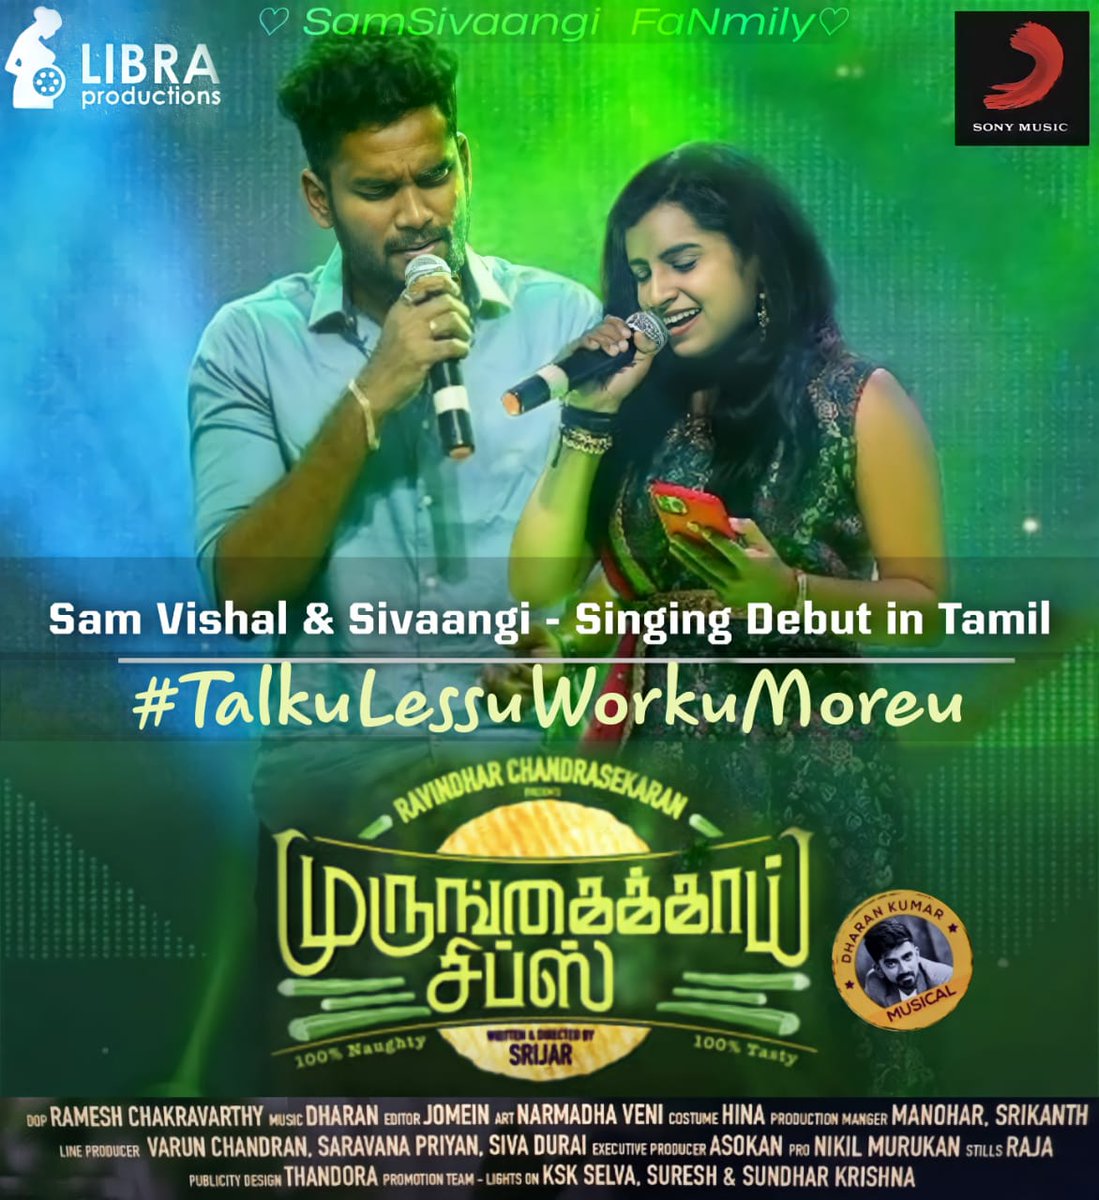 A FaNmily made poster. Hearty Congratulations to Our Playback Singers Samvishal and Sivaangi💛We are all pumped up with adrenaline 🤸to hear you guys make a song of your own☺️

#TalkuLessuWorkuMoreu

@samvishal280999
@sivaangi_k
@dharankumar_c 
@kukarthikoffl 
@SonyMusicSouth